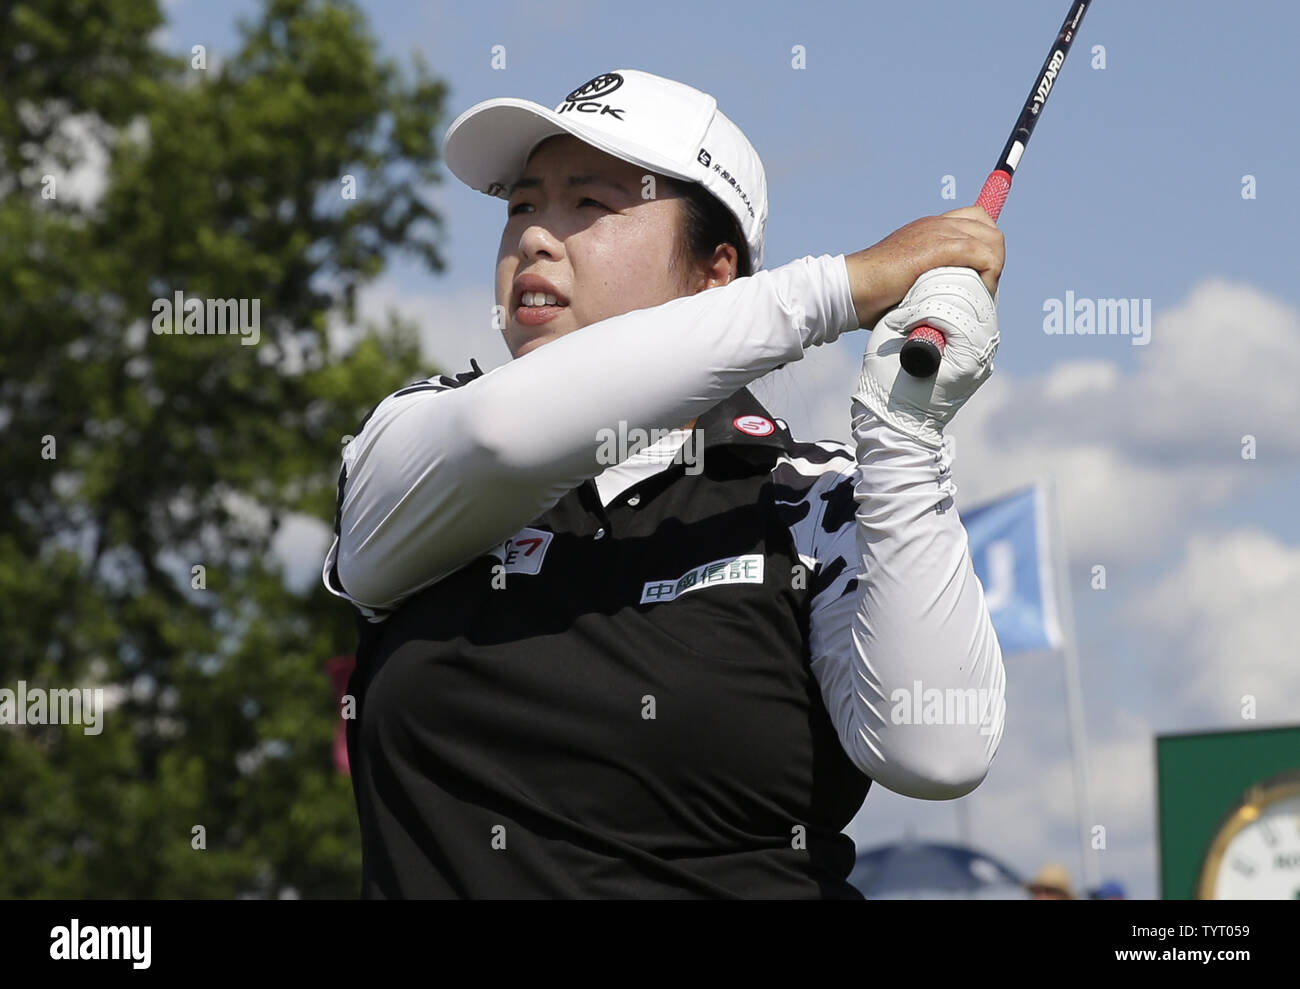 Shanshan Feng of China hits a tee shot on the 10th hole at Trump National Golf Club in the final round of the LPGA U.S. Women's Open Championship  in Bedminster, NJ on July 14, 2017.     Photo by John Angelillo/UPI Stock Photo